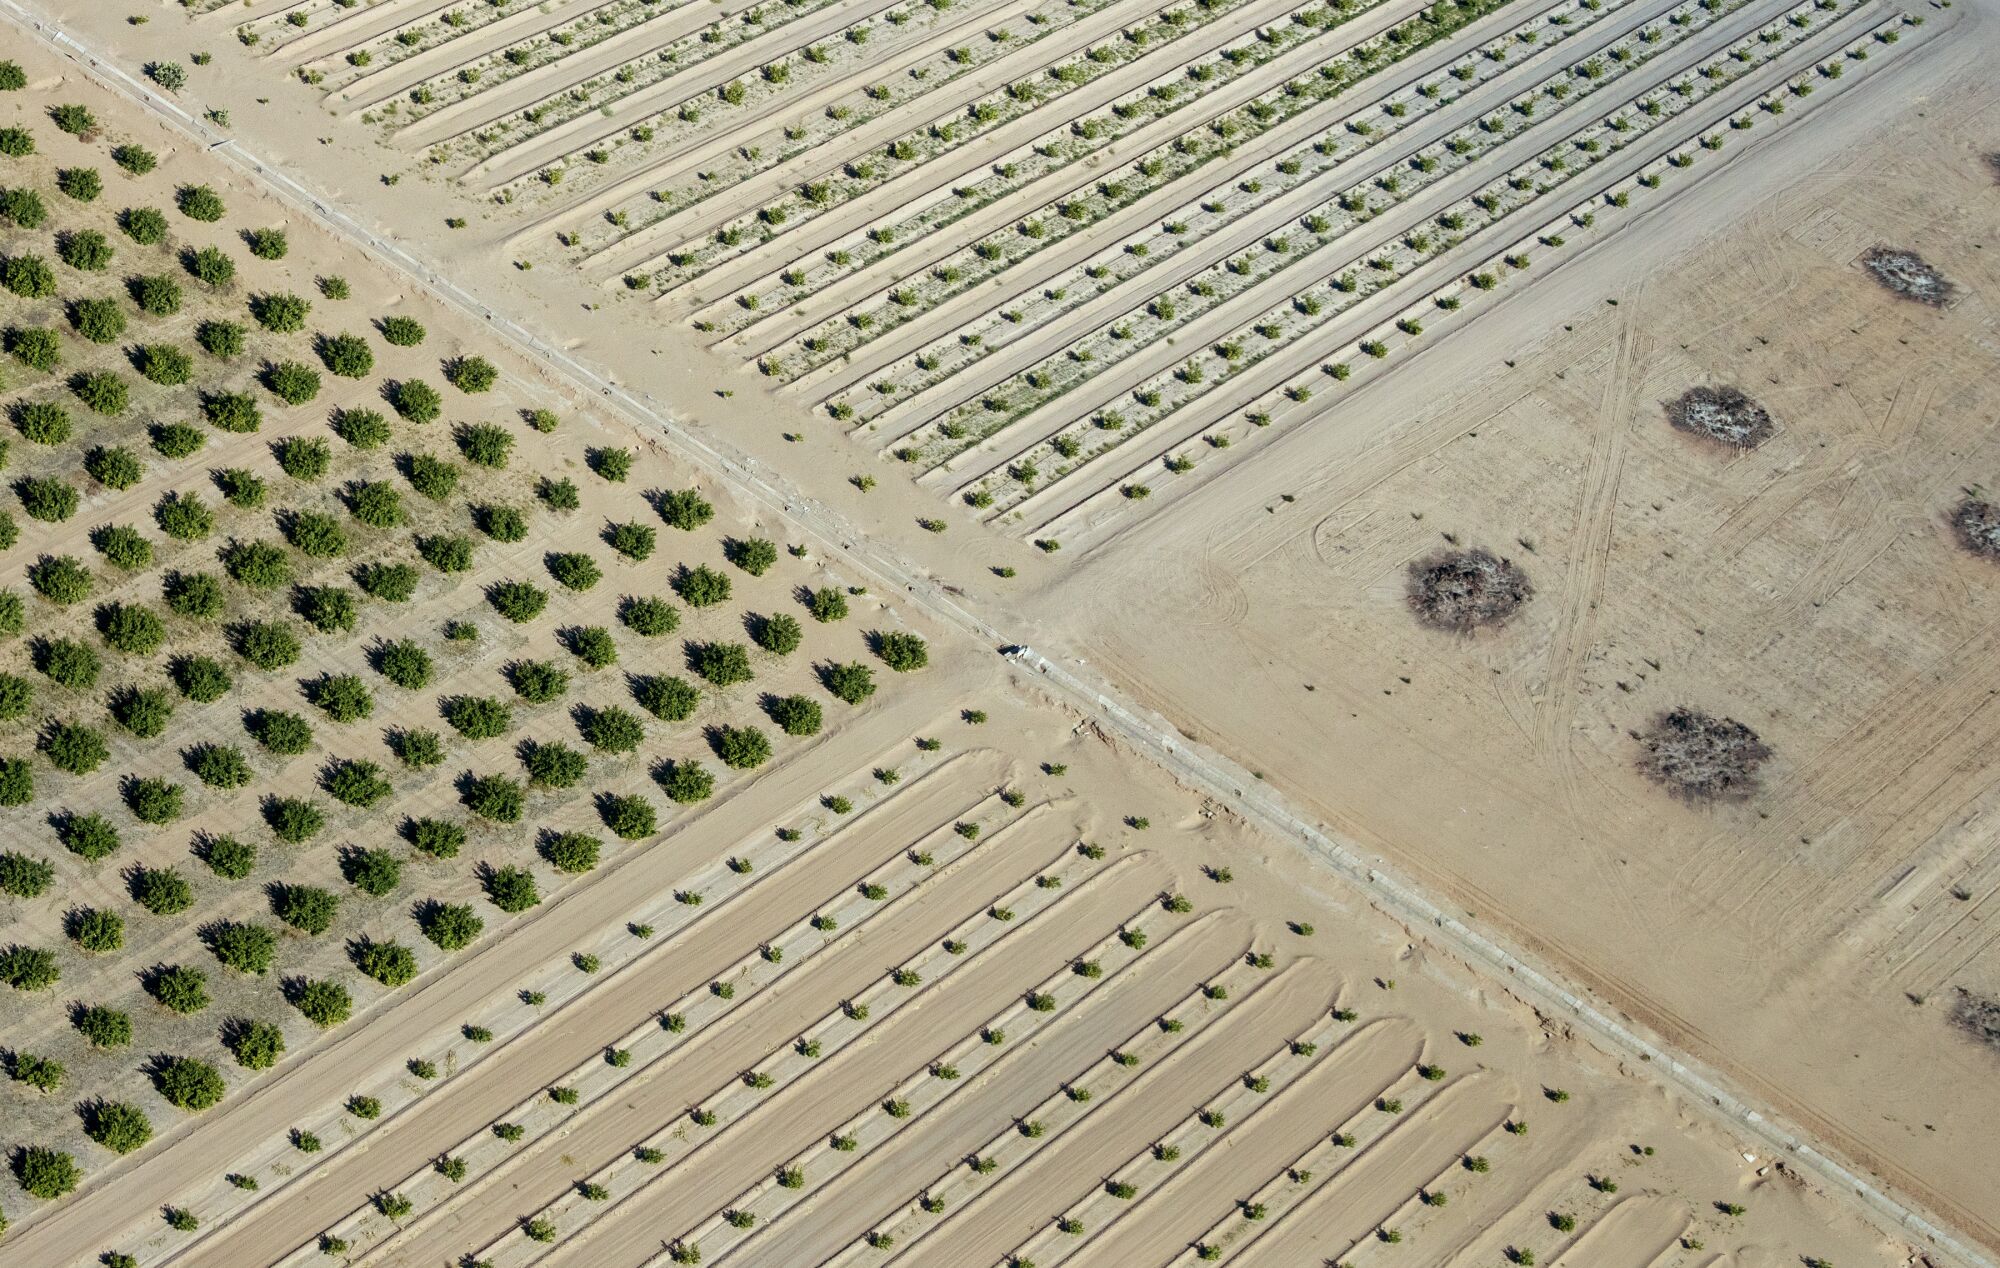 Seen from above, plants stand in neat rows on a desert farm.